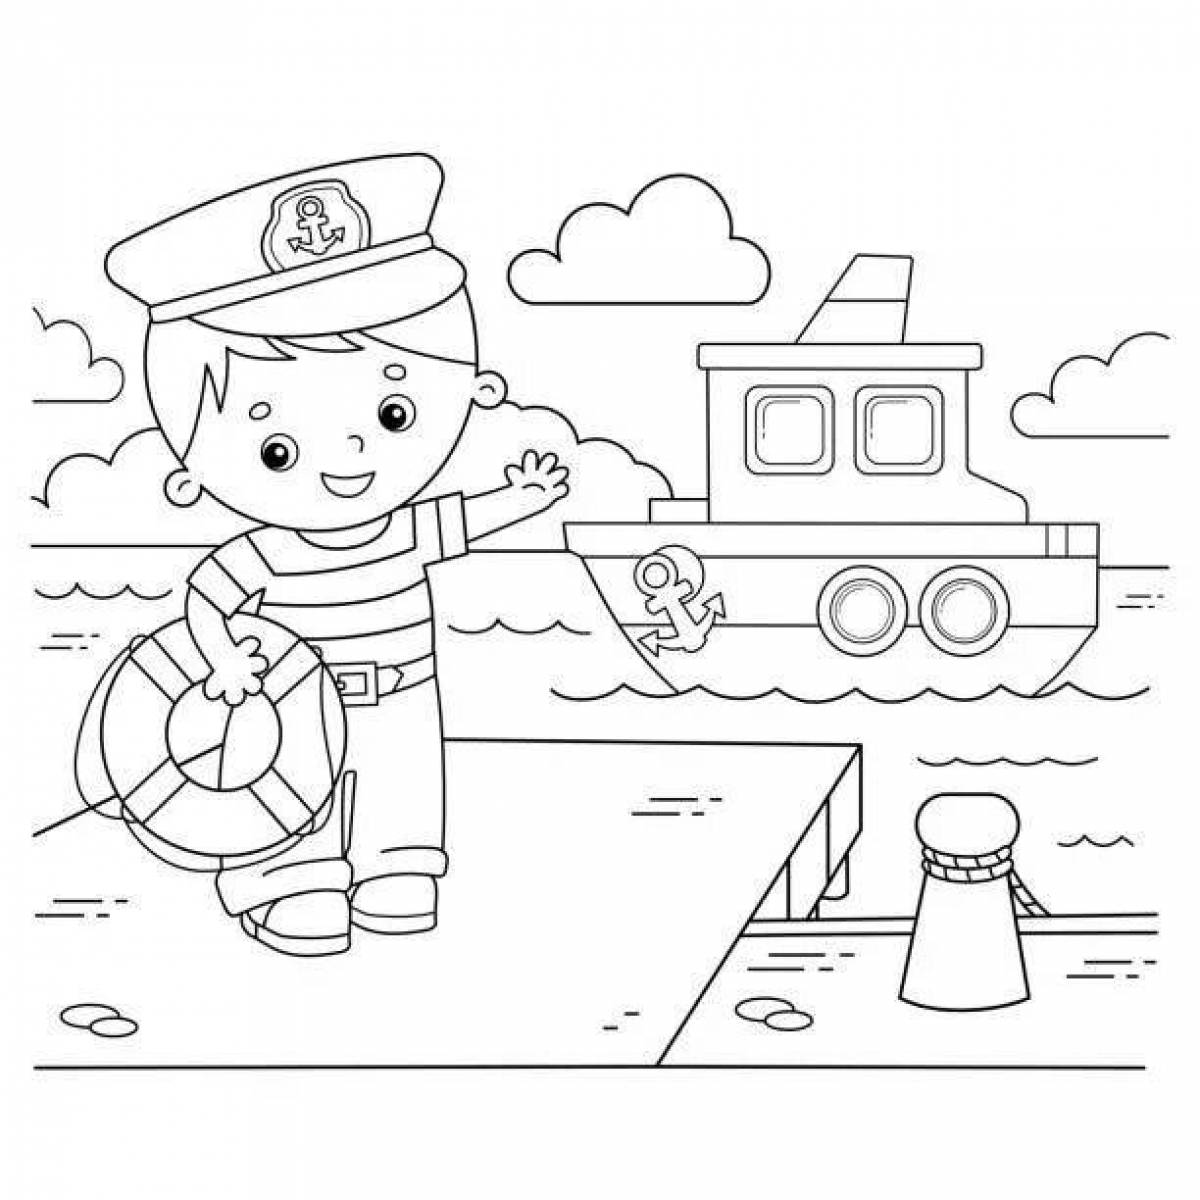 Colorful-sailor-voyage sailor coloring book for kids